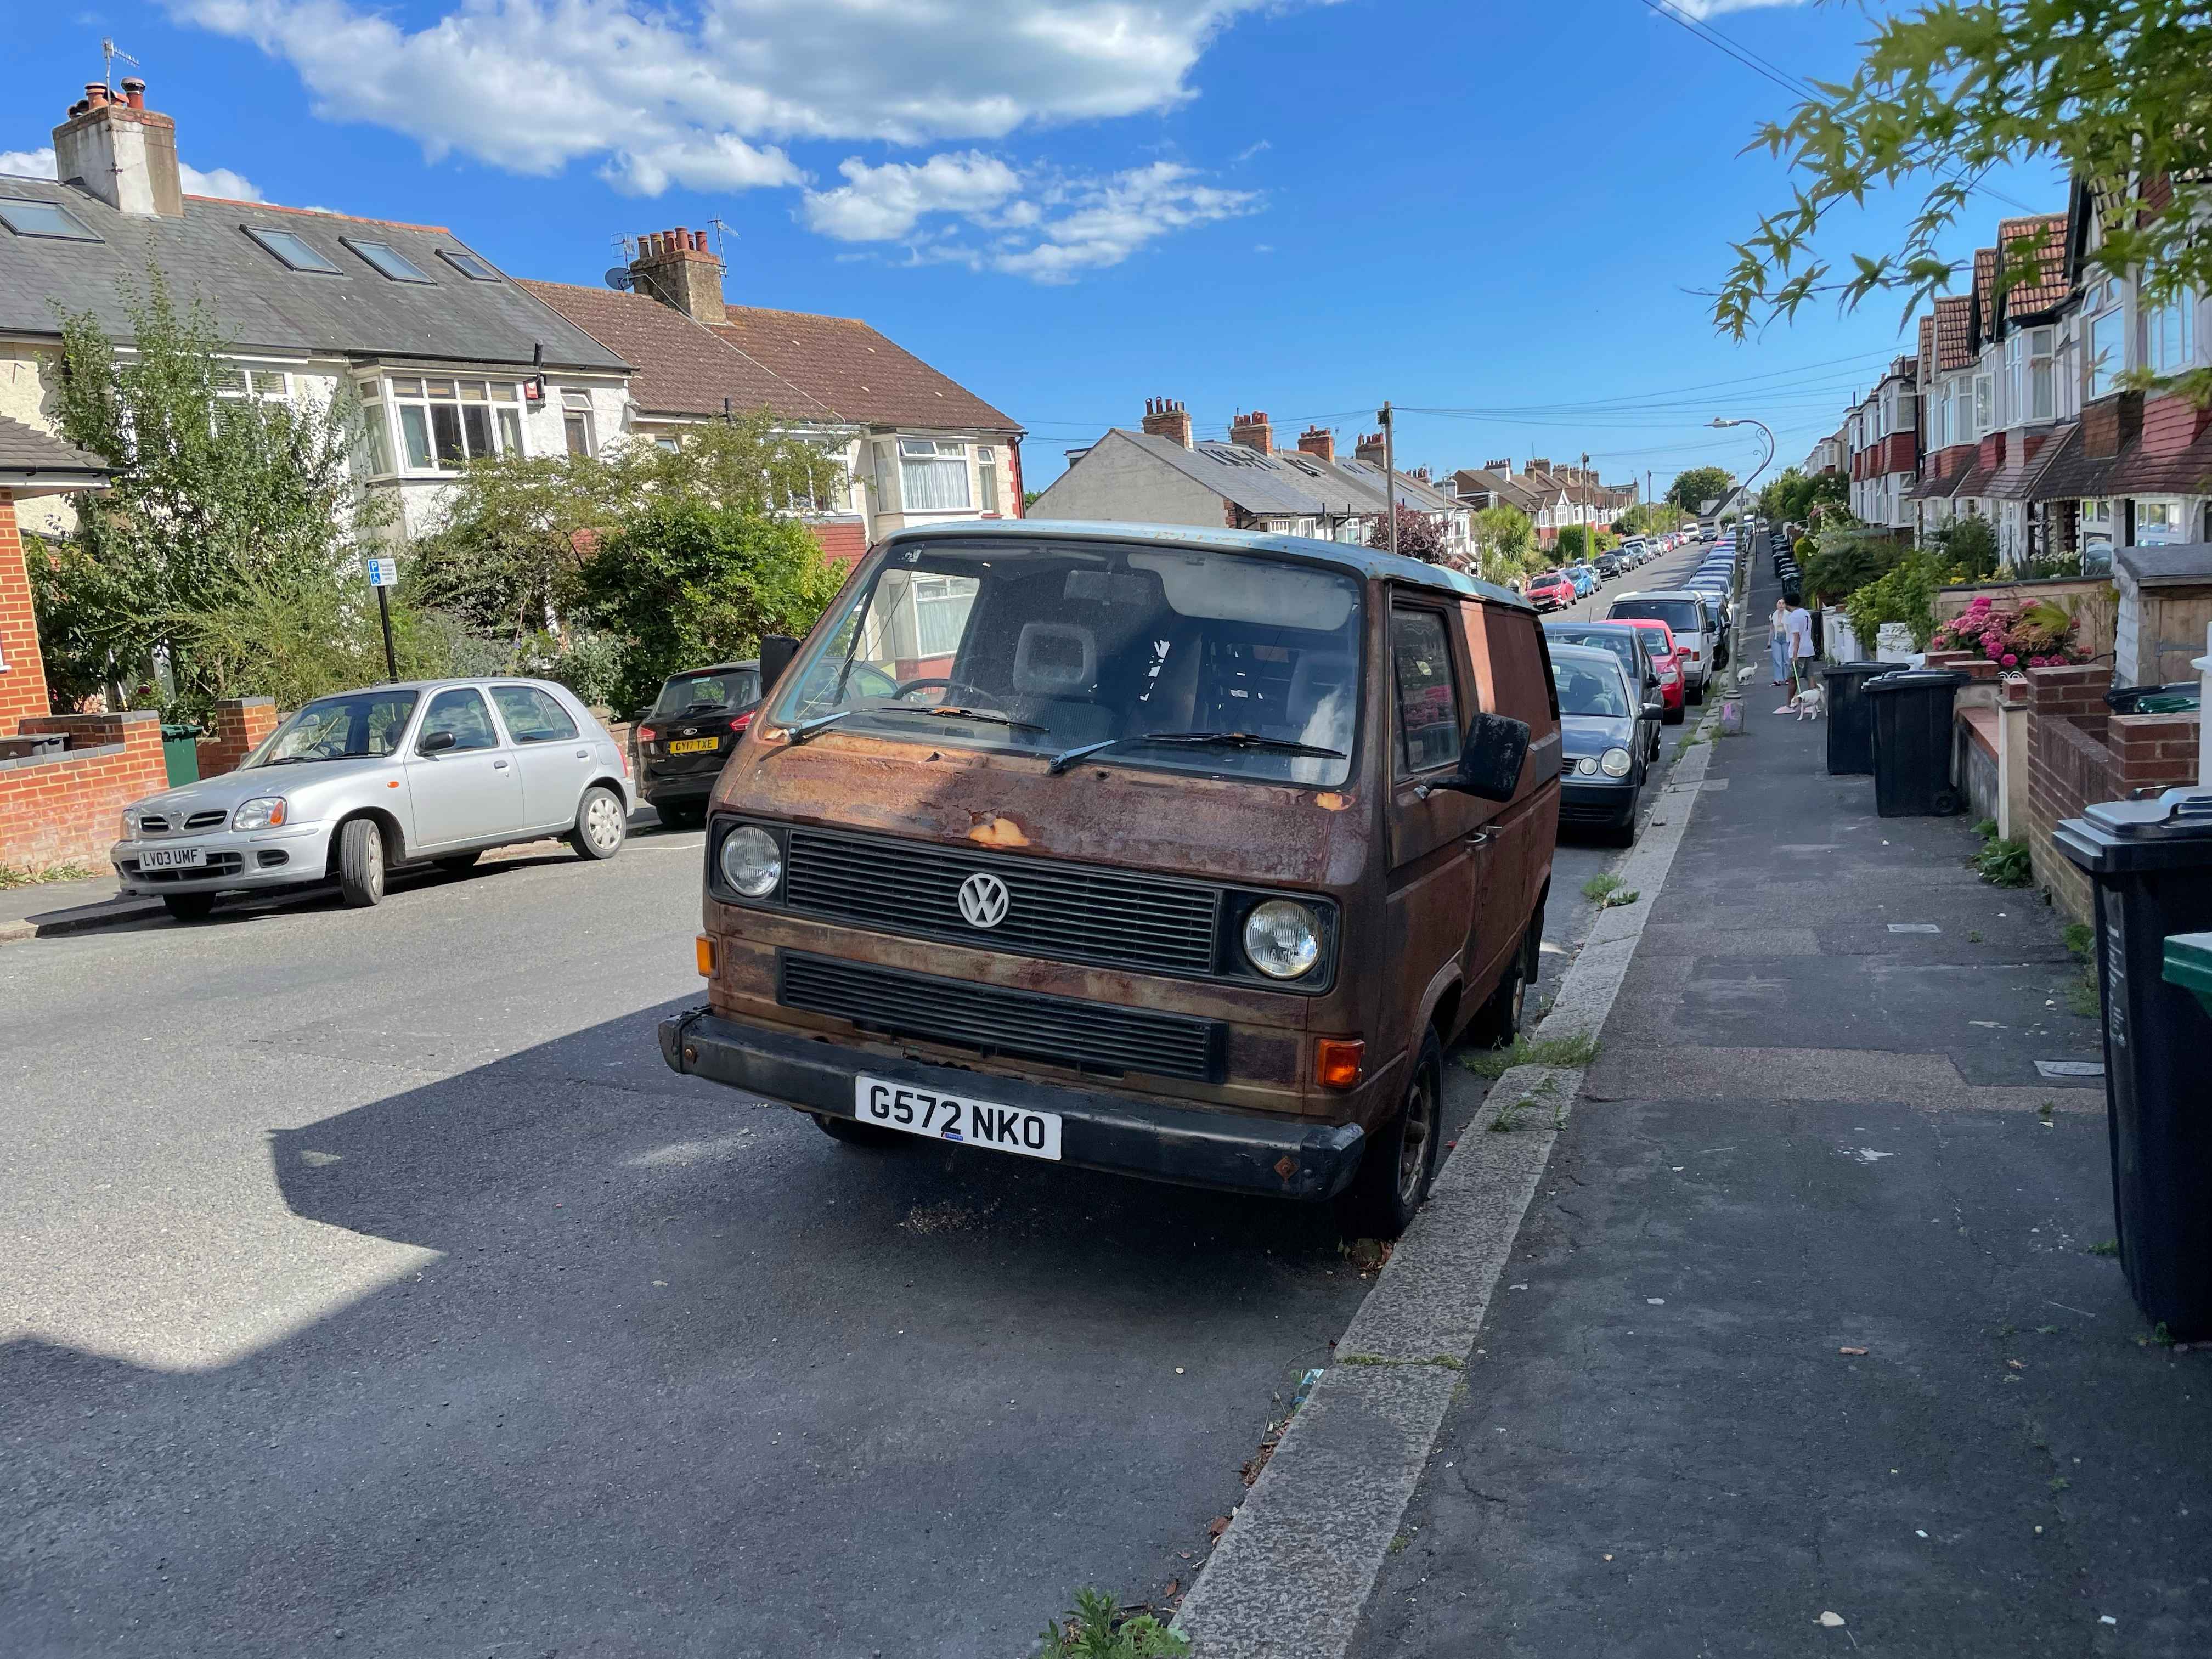 Photograph of G572 NKO - a Rusty Volkswagen Transporter camper van parked in Hollingdean by a non-resident. The first of two photographs supplied by the residents of Hollingdean.